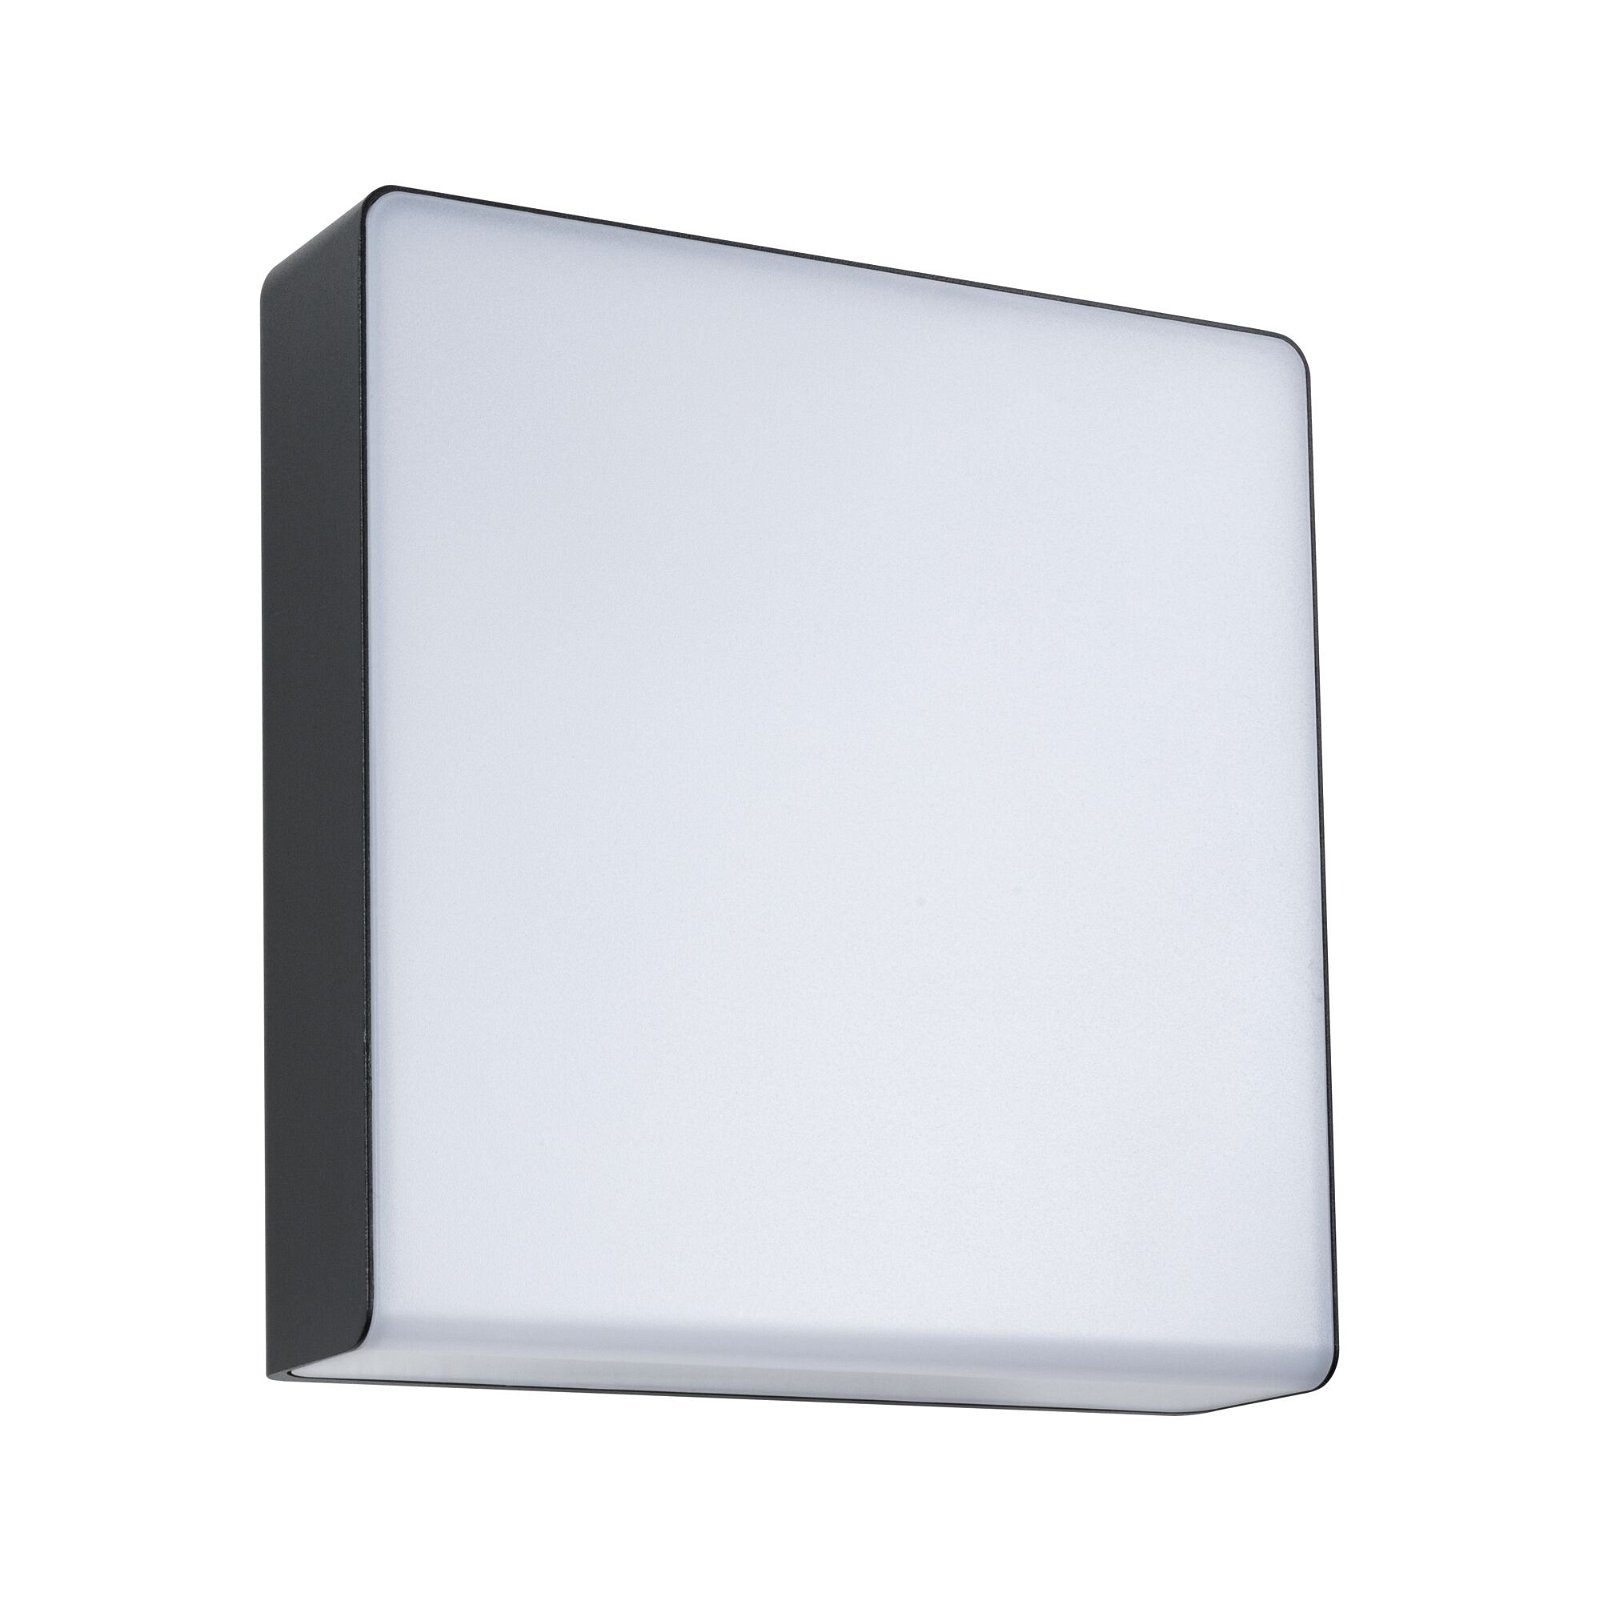 LED Exterior wall luminaire Smart Home Zigbee 3.0 Azalena High frequency sensor insect friendly IP44 250x97mm Tunable Warm 8,5W 700lm 230V Anthracite Plastic/Aluminium